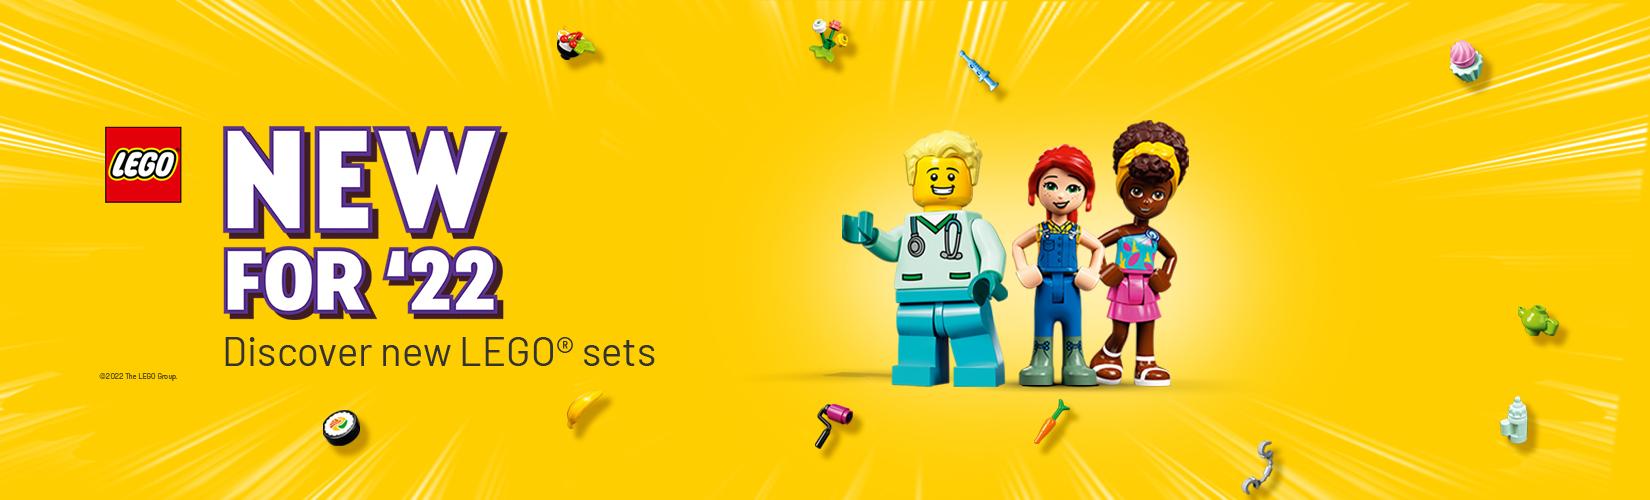 New for '22. Discover new LEGO® sets.